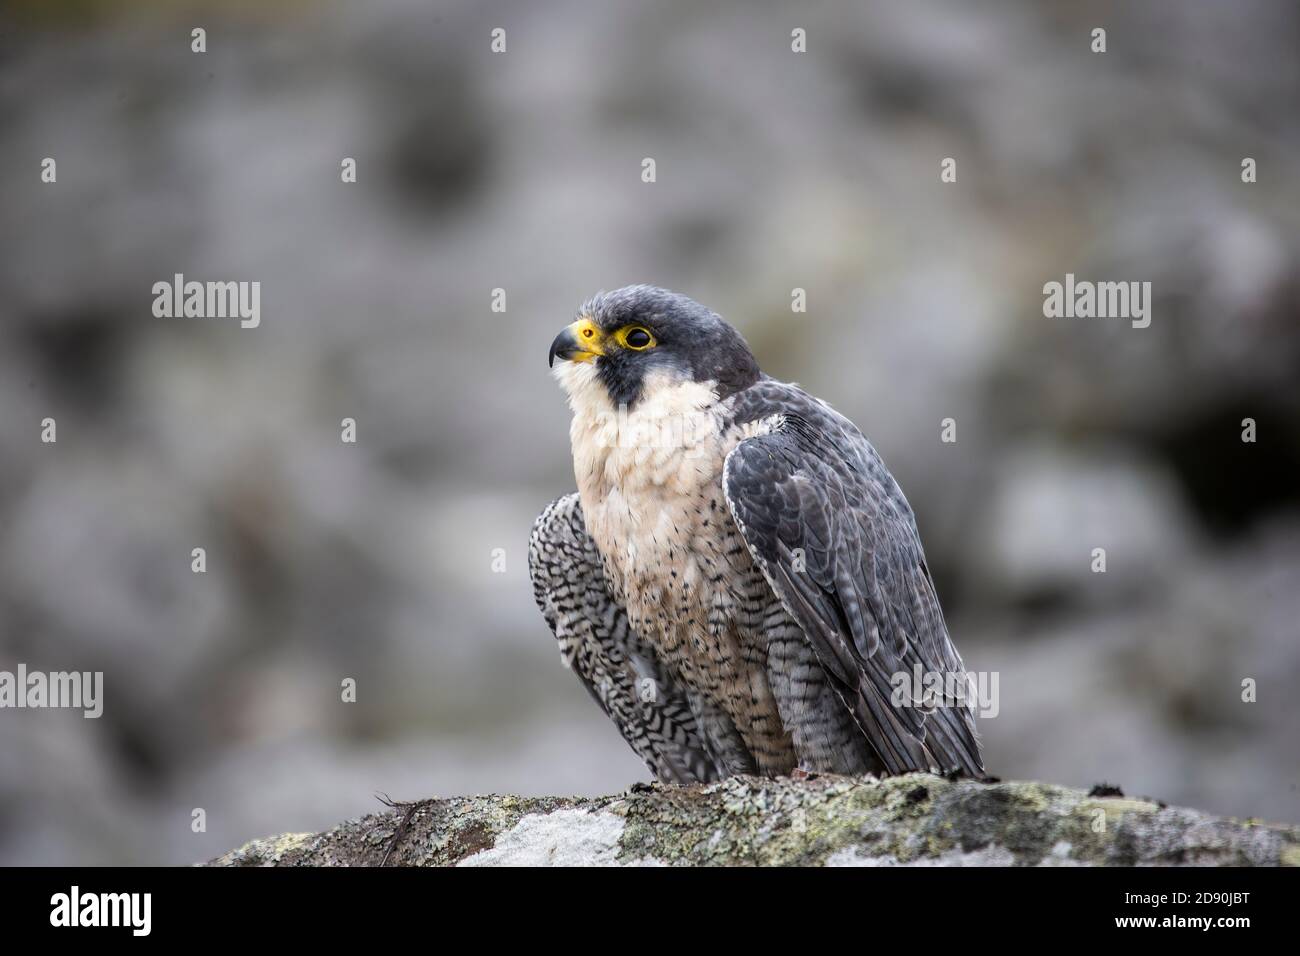 An adult Peregrine falcon Falco peregrinus captive perching on a rocky outcrop in the Cumbrian uplands U.K. Stock Photo